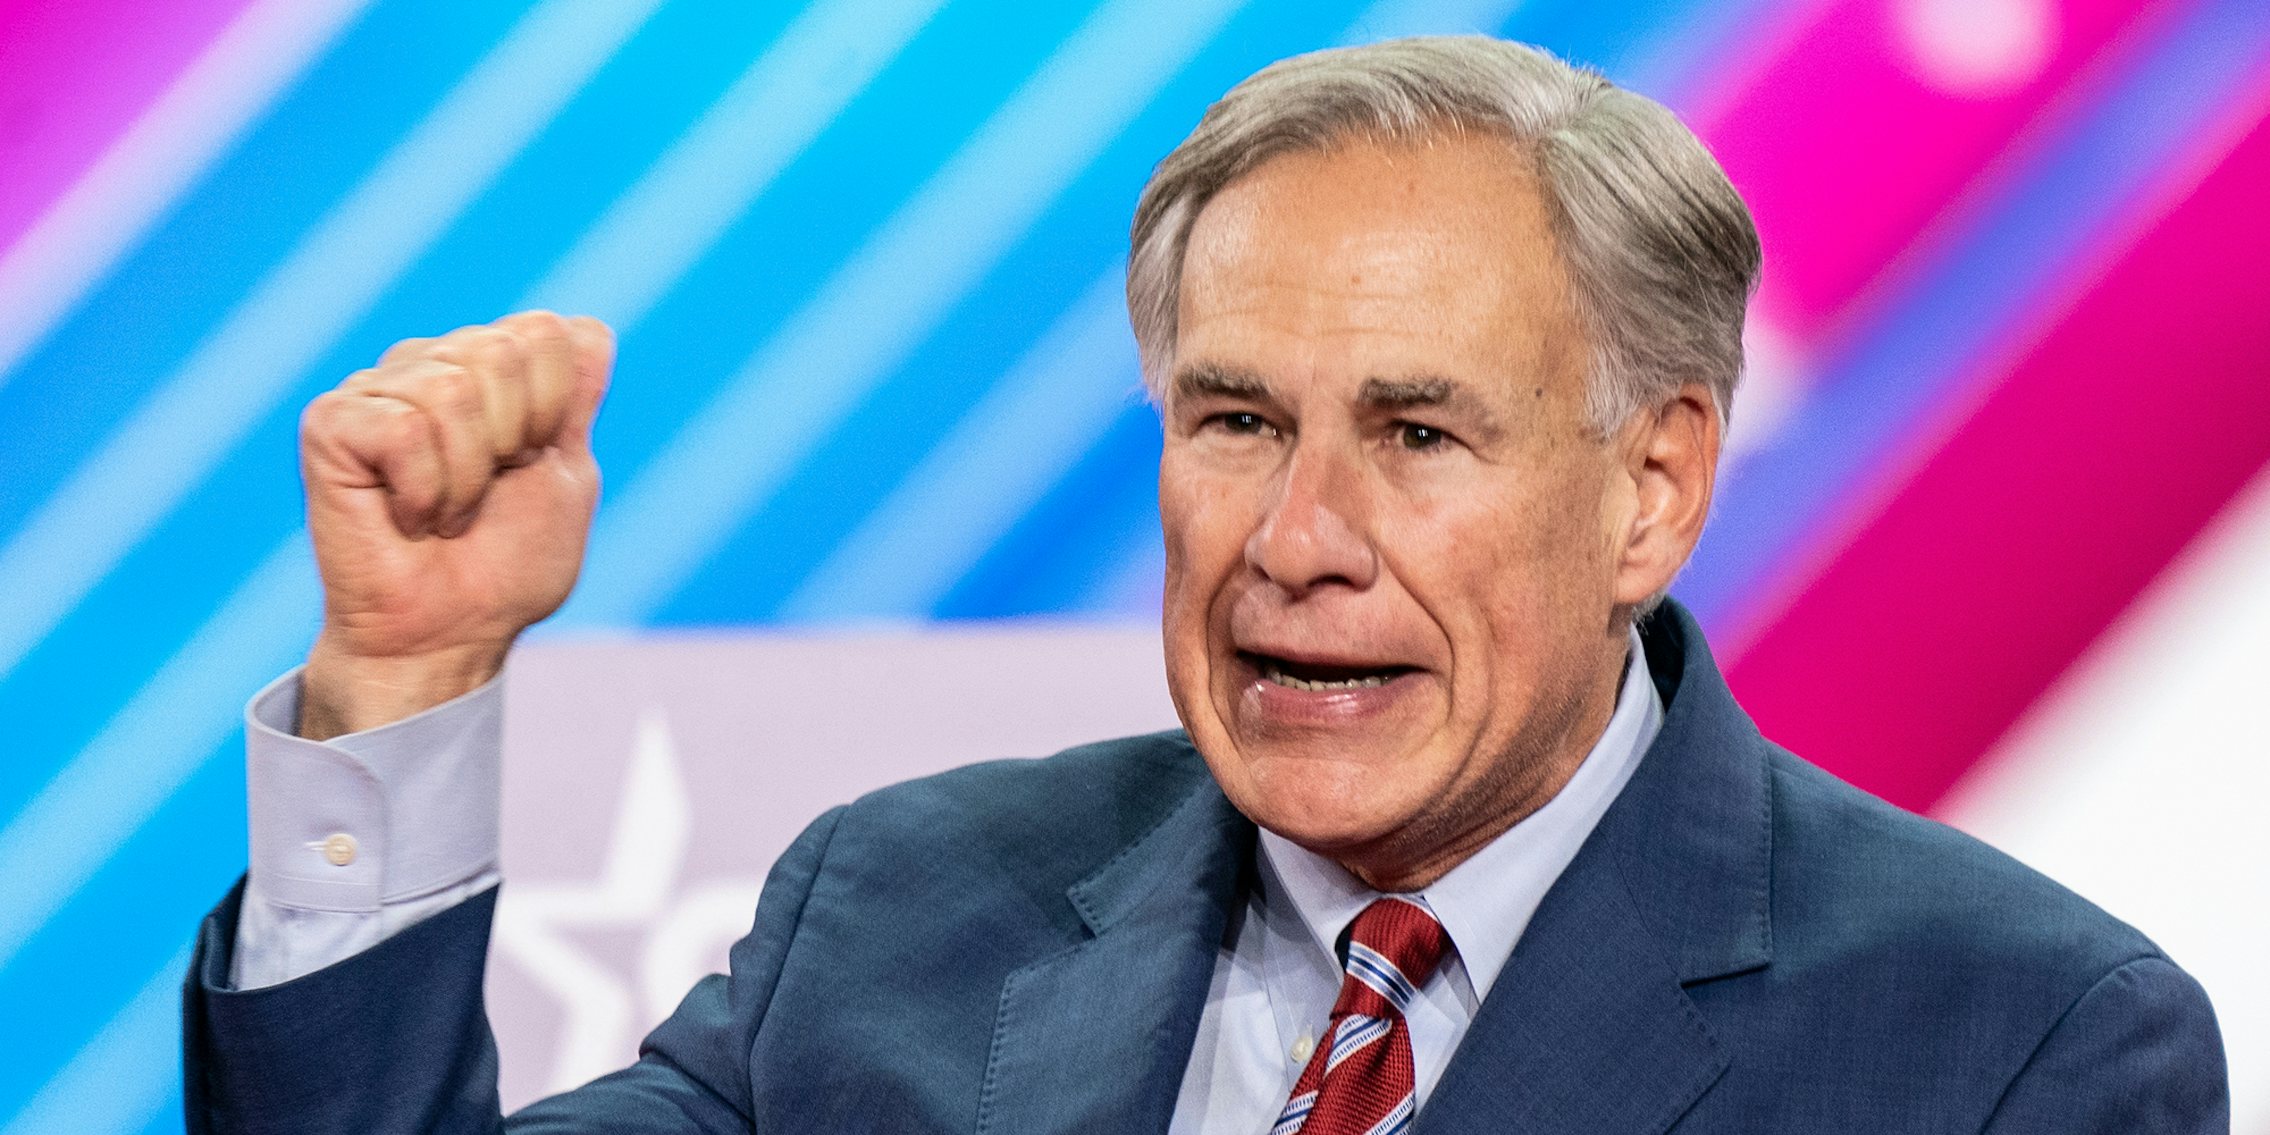 Governor of Texas Greg Abbott speaks during CPAC Texas 2022 conference at Hilton Anatole